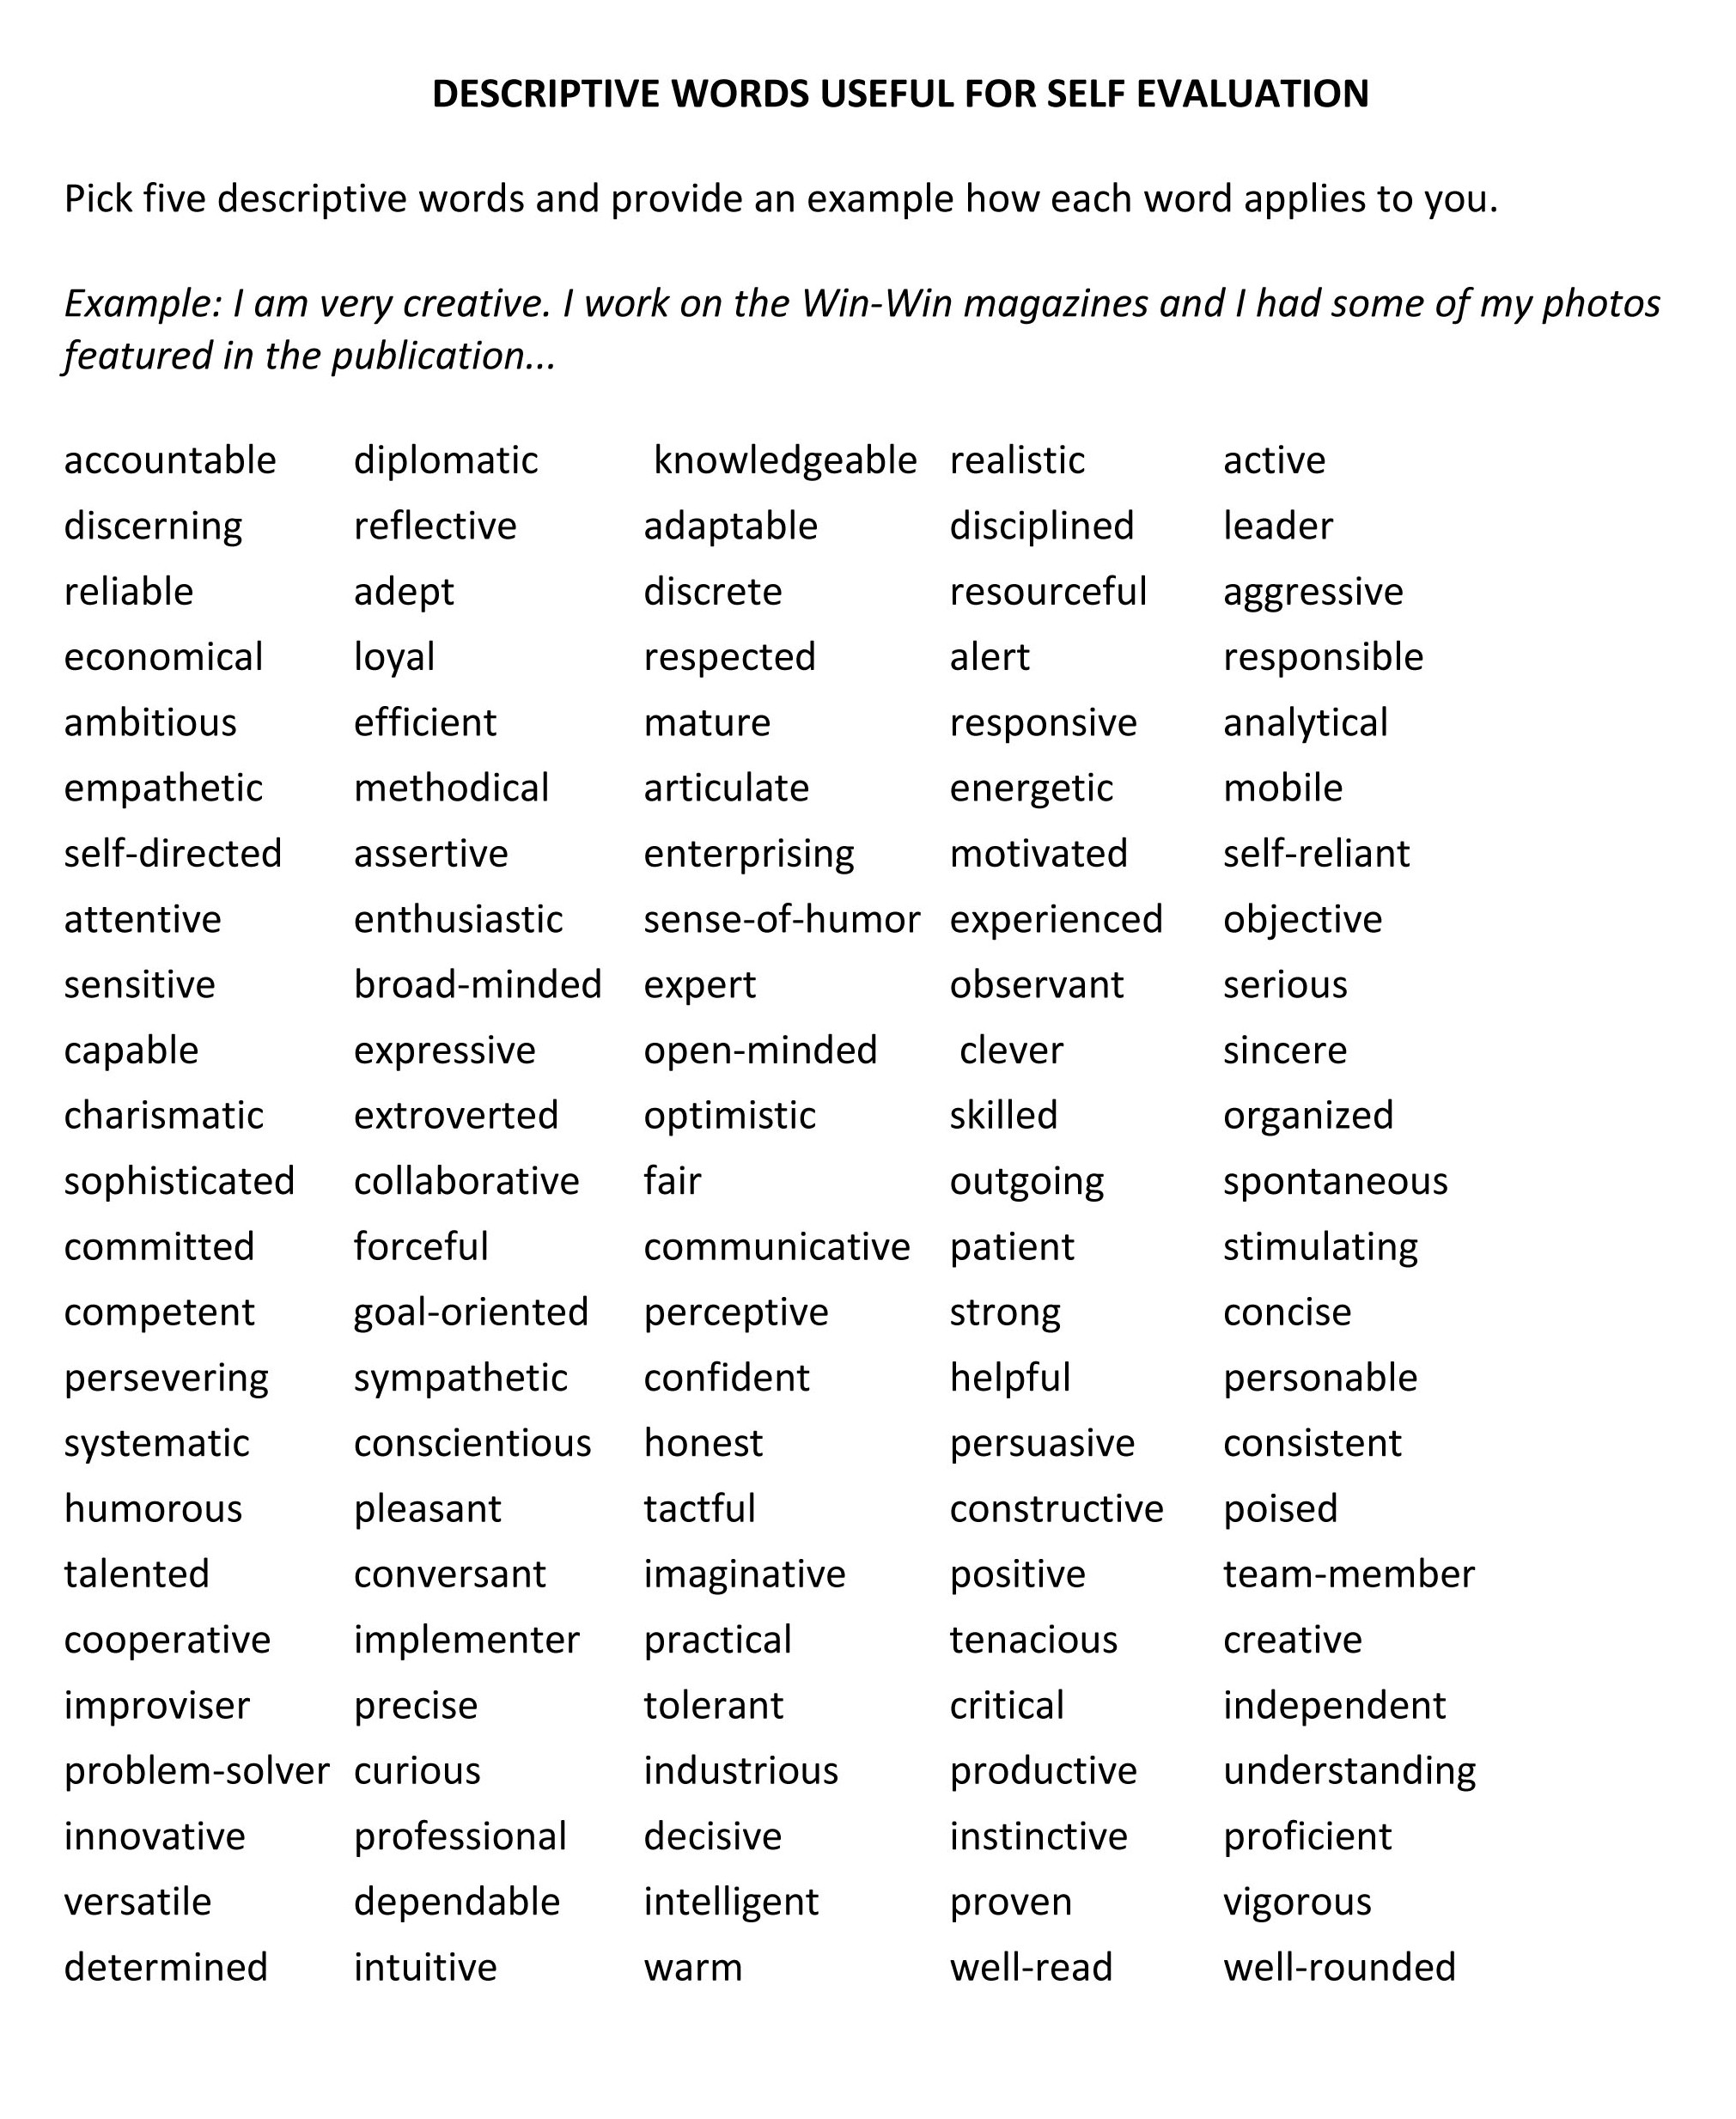 List of transition words for college essays